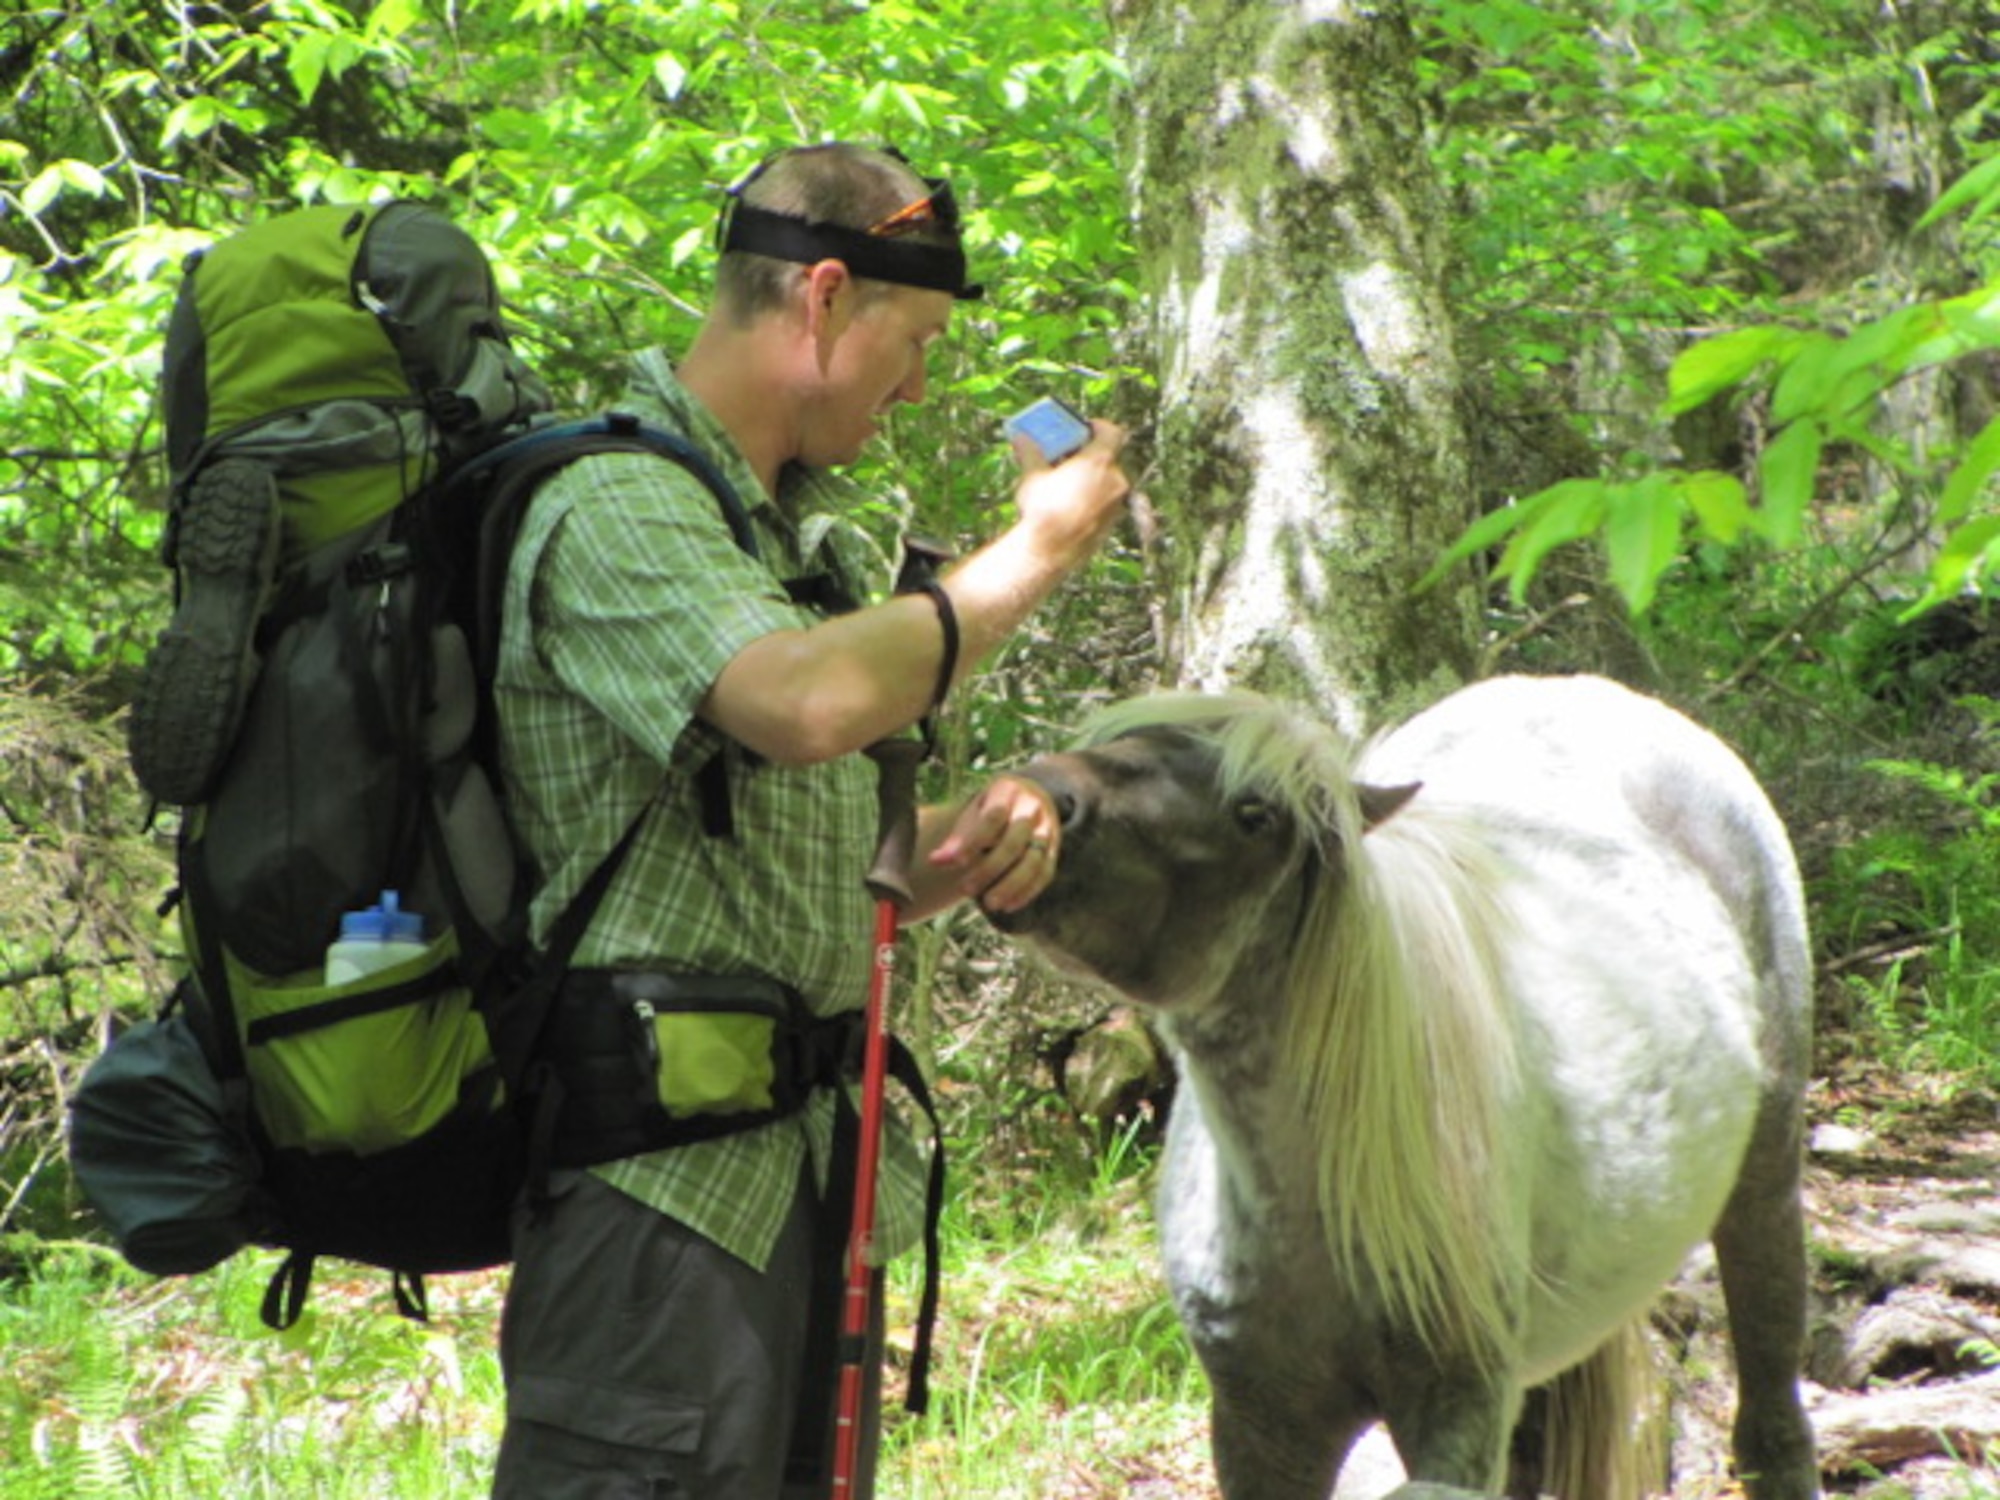 A wild pony at Grayson Highlands State Park in Virginia licks salt off the arm of Robert Ligas II as he hikes the Appalachian Trail on May 23, 2016, with his father, Rob. Rob Ligas, a retired Airman and longtime civilian employee at Wright-Patterson Air Force Base, Ohio, completed the full 2,198-mile journey this past summer. (Contributed photo)